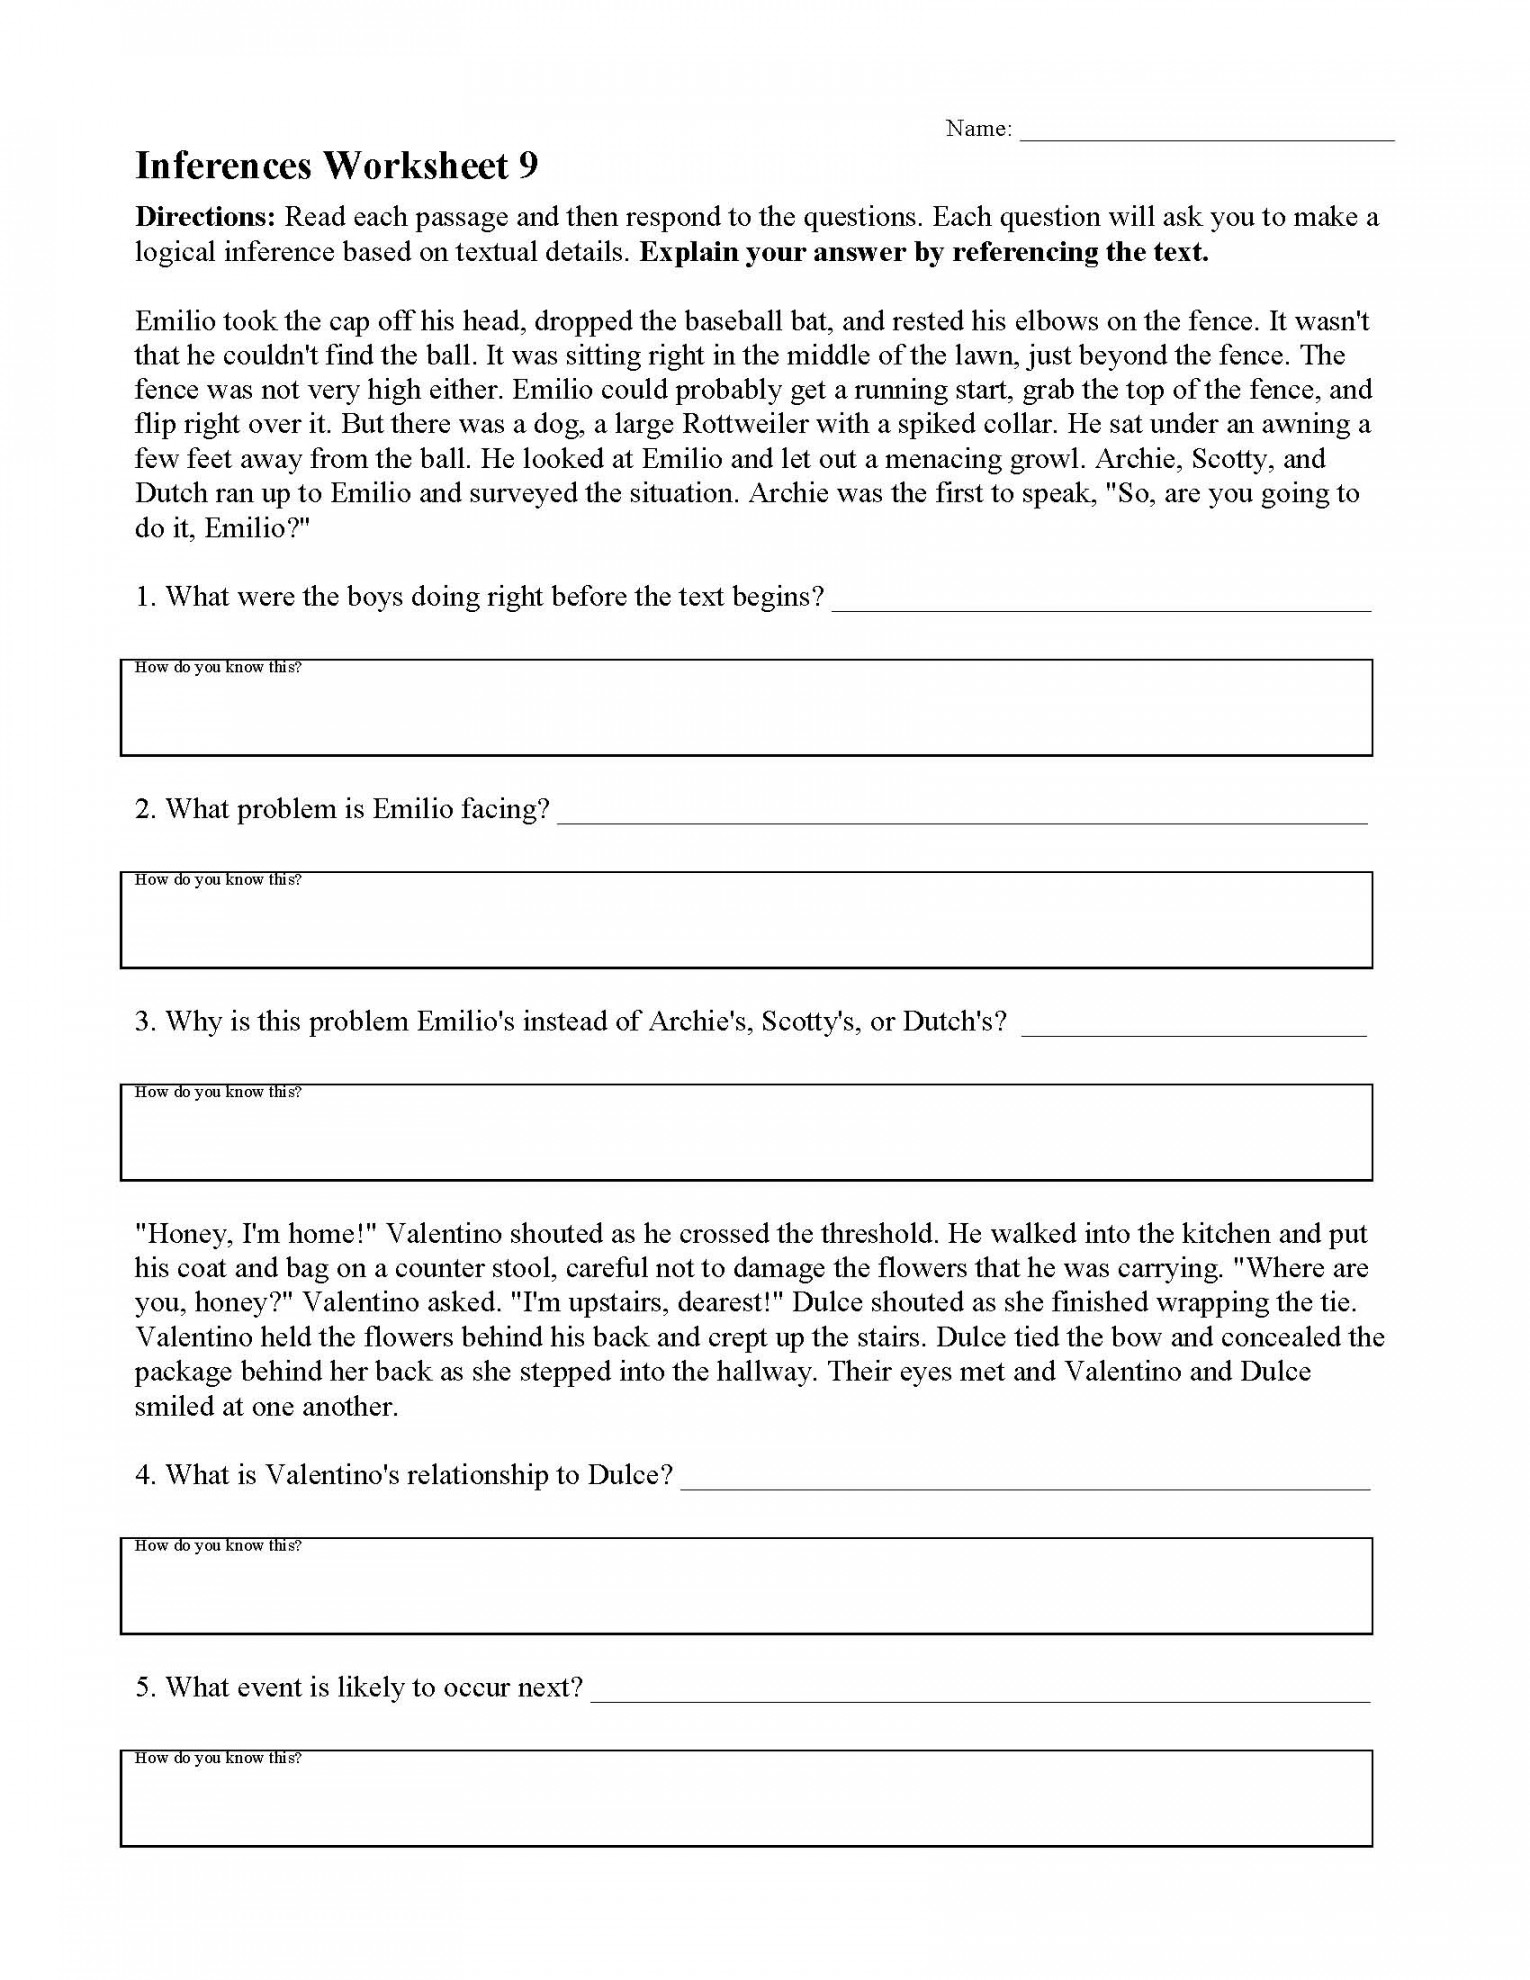 Inferences Worksheet   Reading Activity